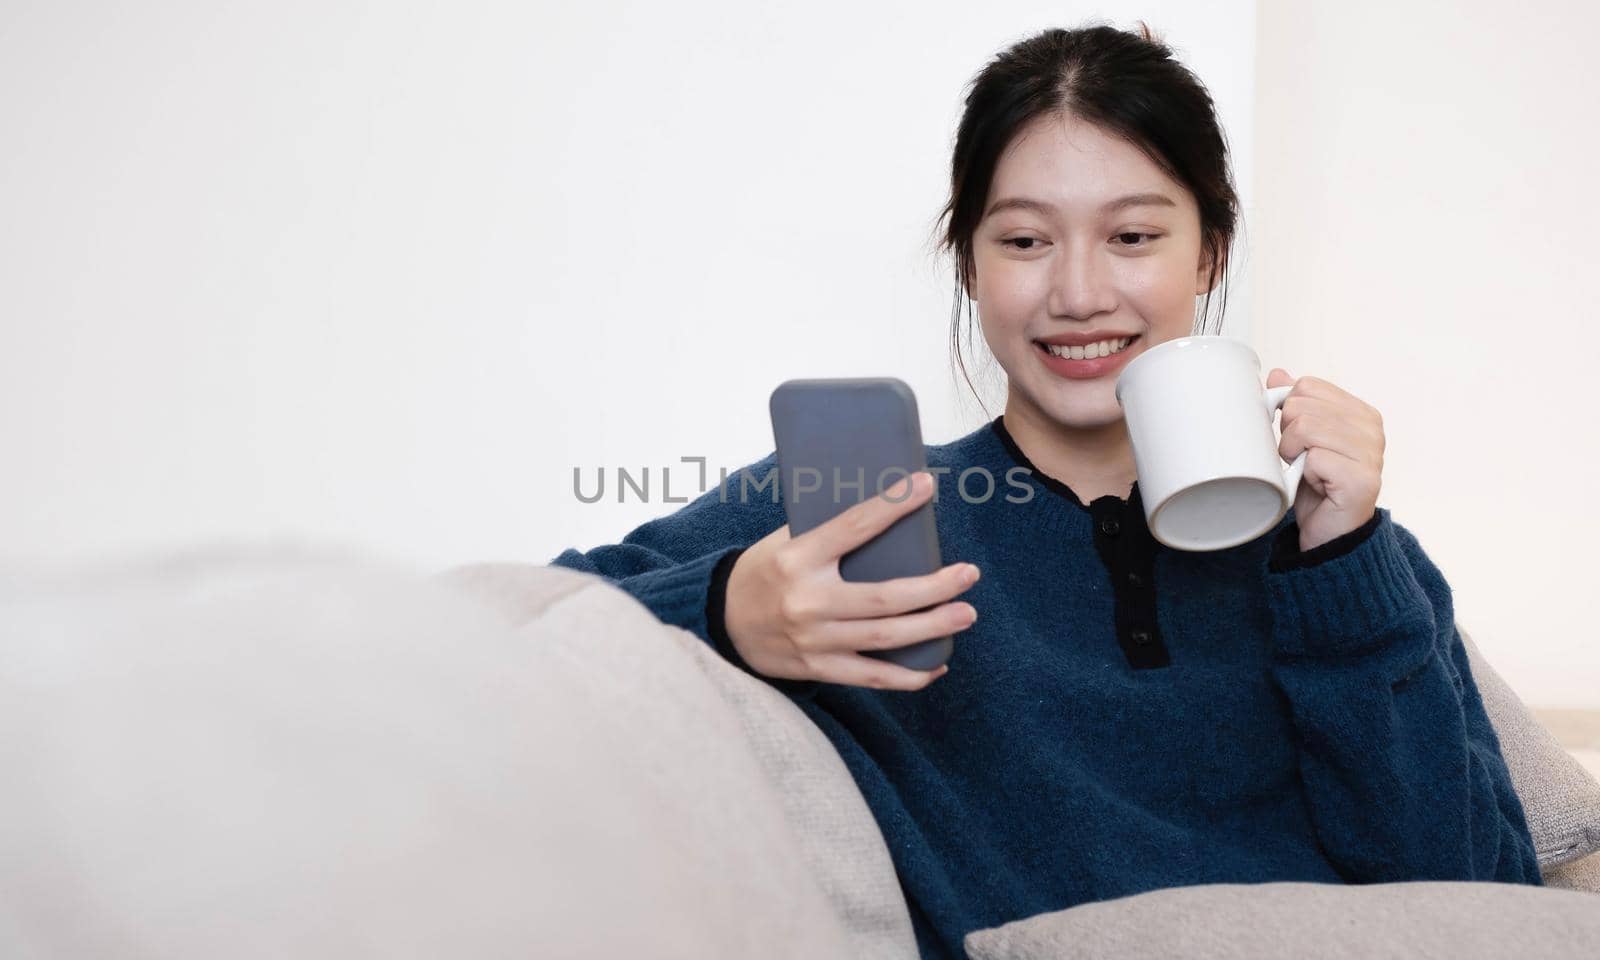 Close-up Of Smiling thailand Lady Having Cellphone Conversation And Enjoying Hot Drink While Relaxing On Couch. by wichayada